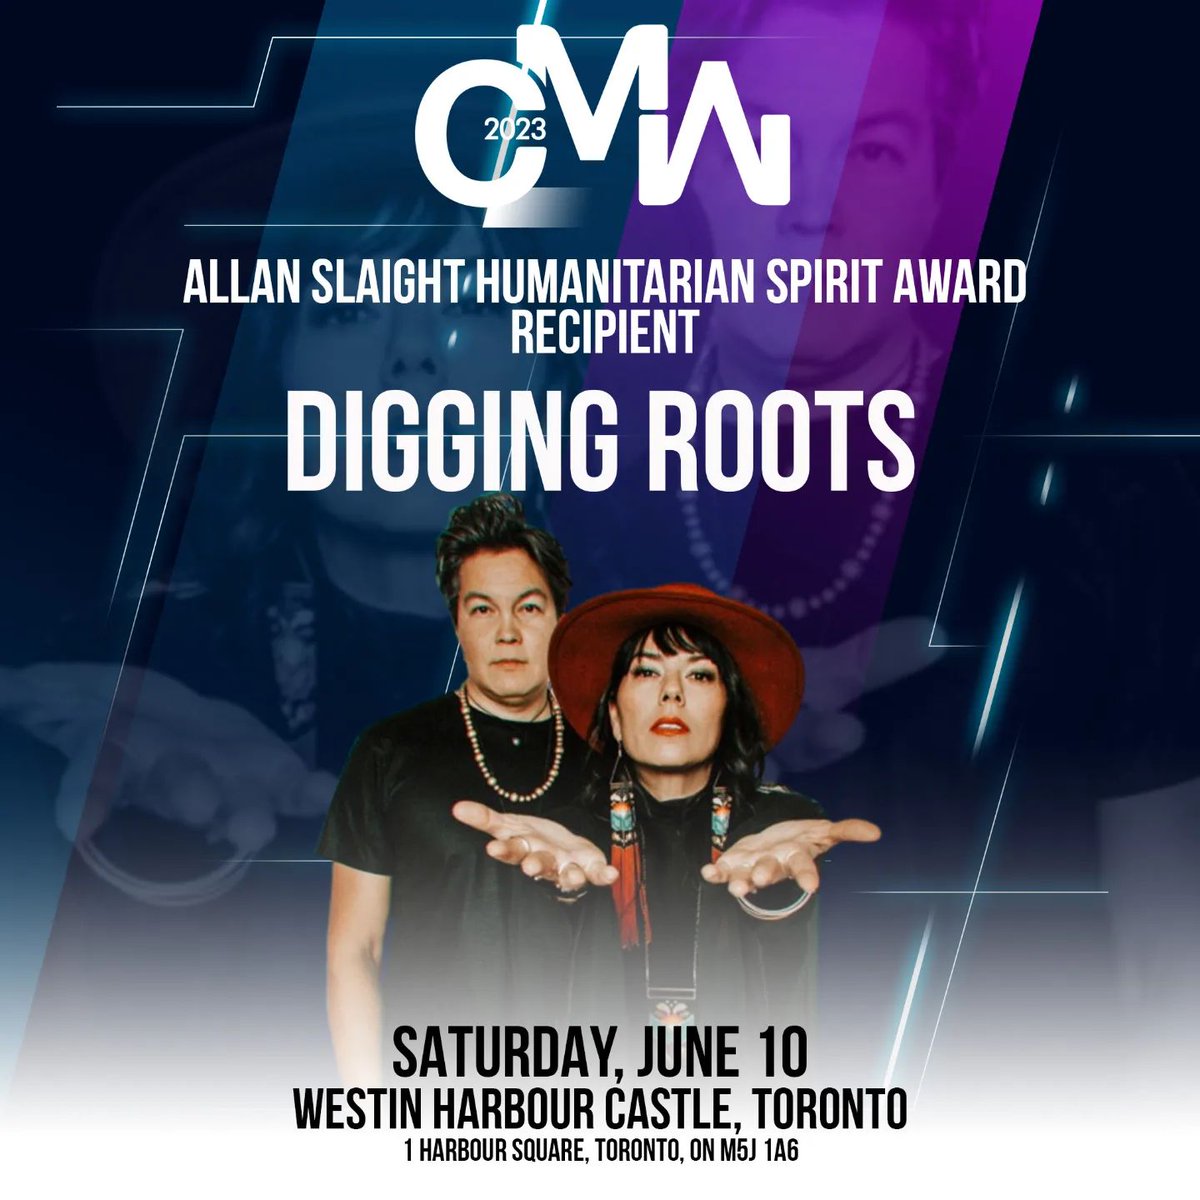 Chi Miigwetch for this honour @CMW_Week @SlaightMusic. We are so grateful to have this opportunity. We are beyond words at the moment but will be back to share more of our thoughts and gratitude. #DiggingRoots #NomadHearts